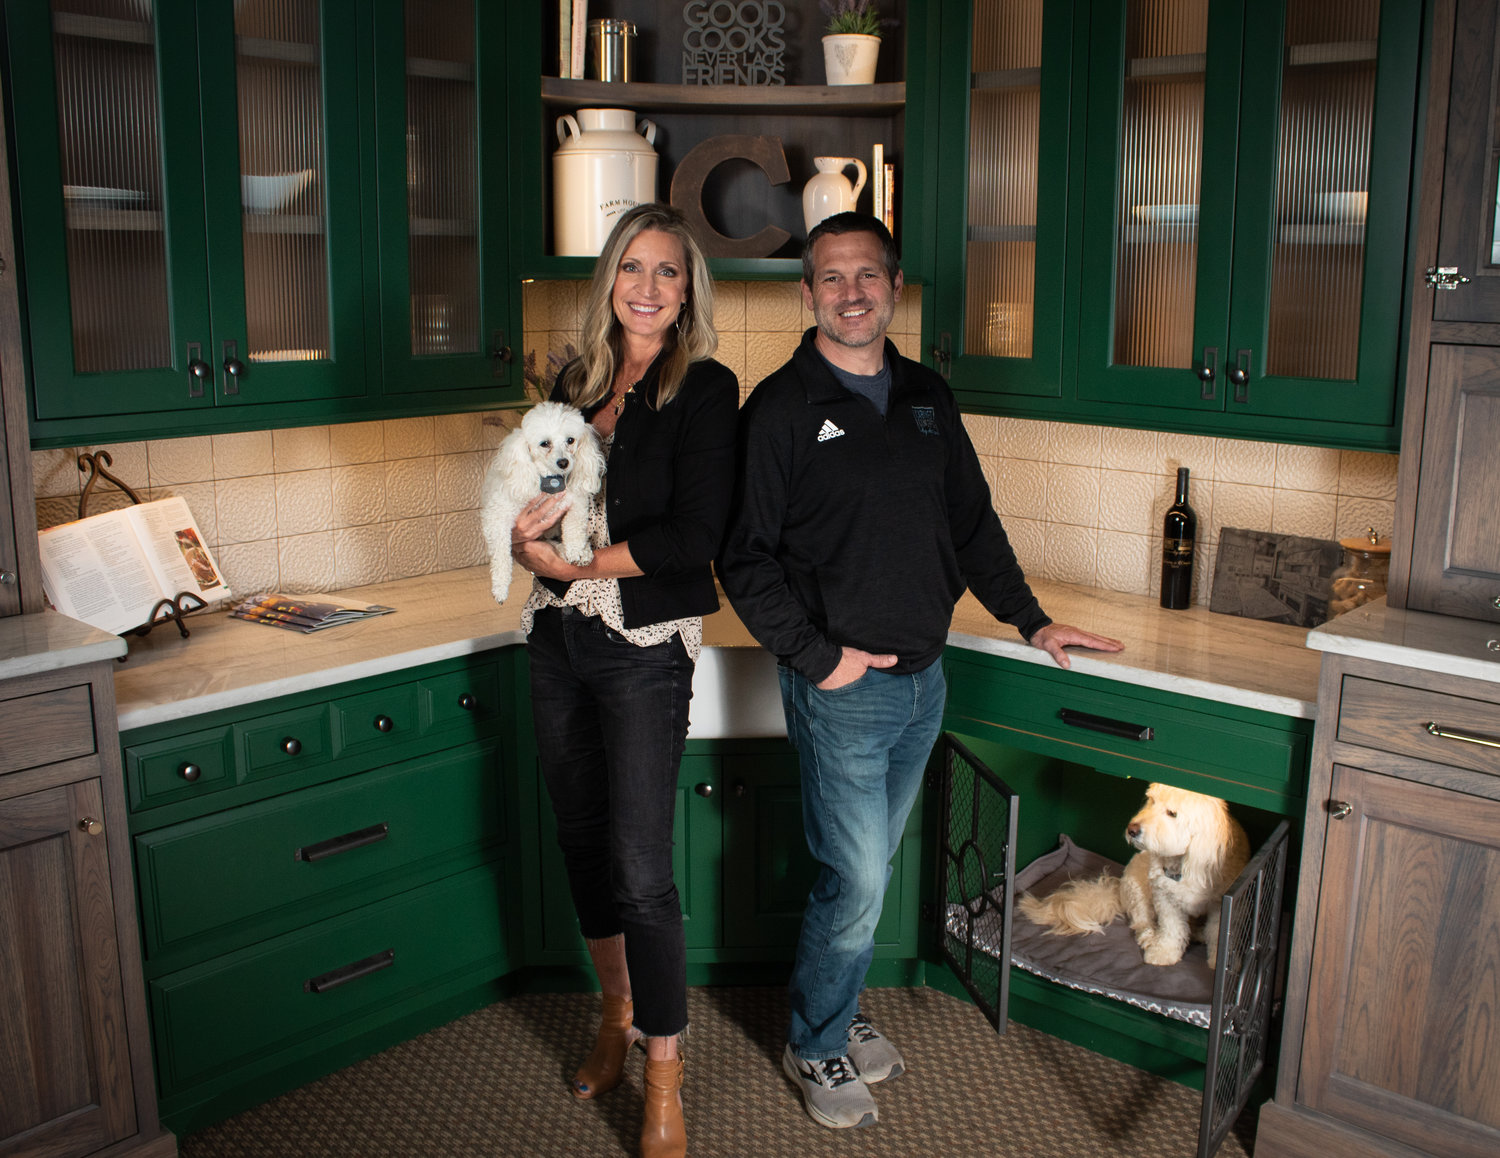 Cabinet Concepts by Design, led by Matt and Shelley Wehner, is this year’s winner of the W. Curtis Strube Small Business Award.